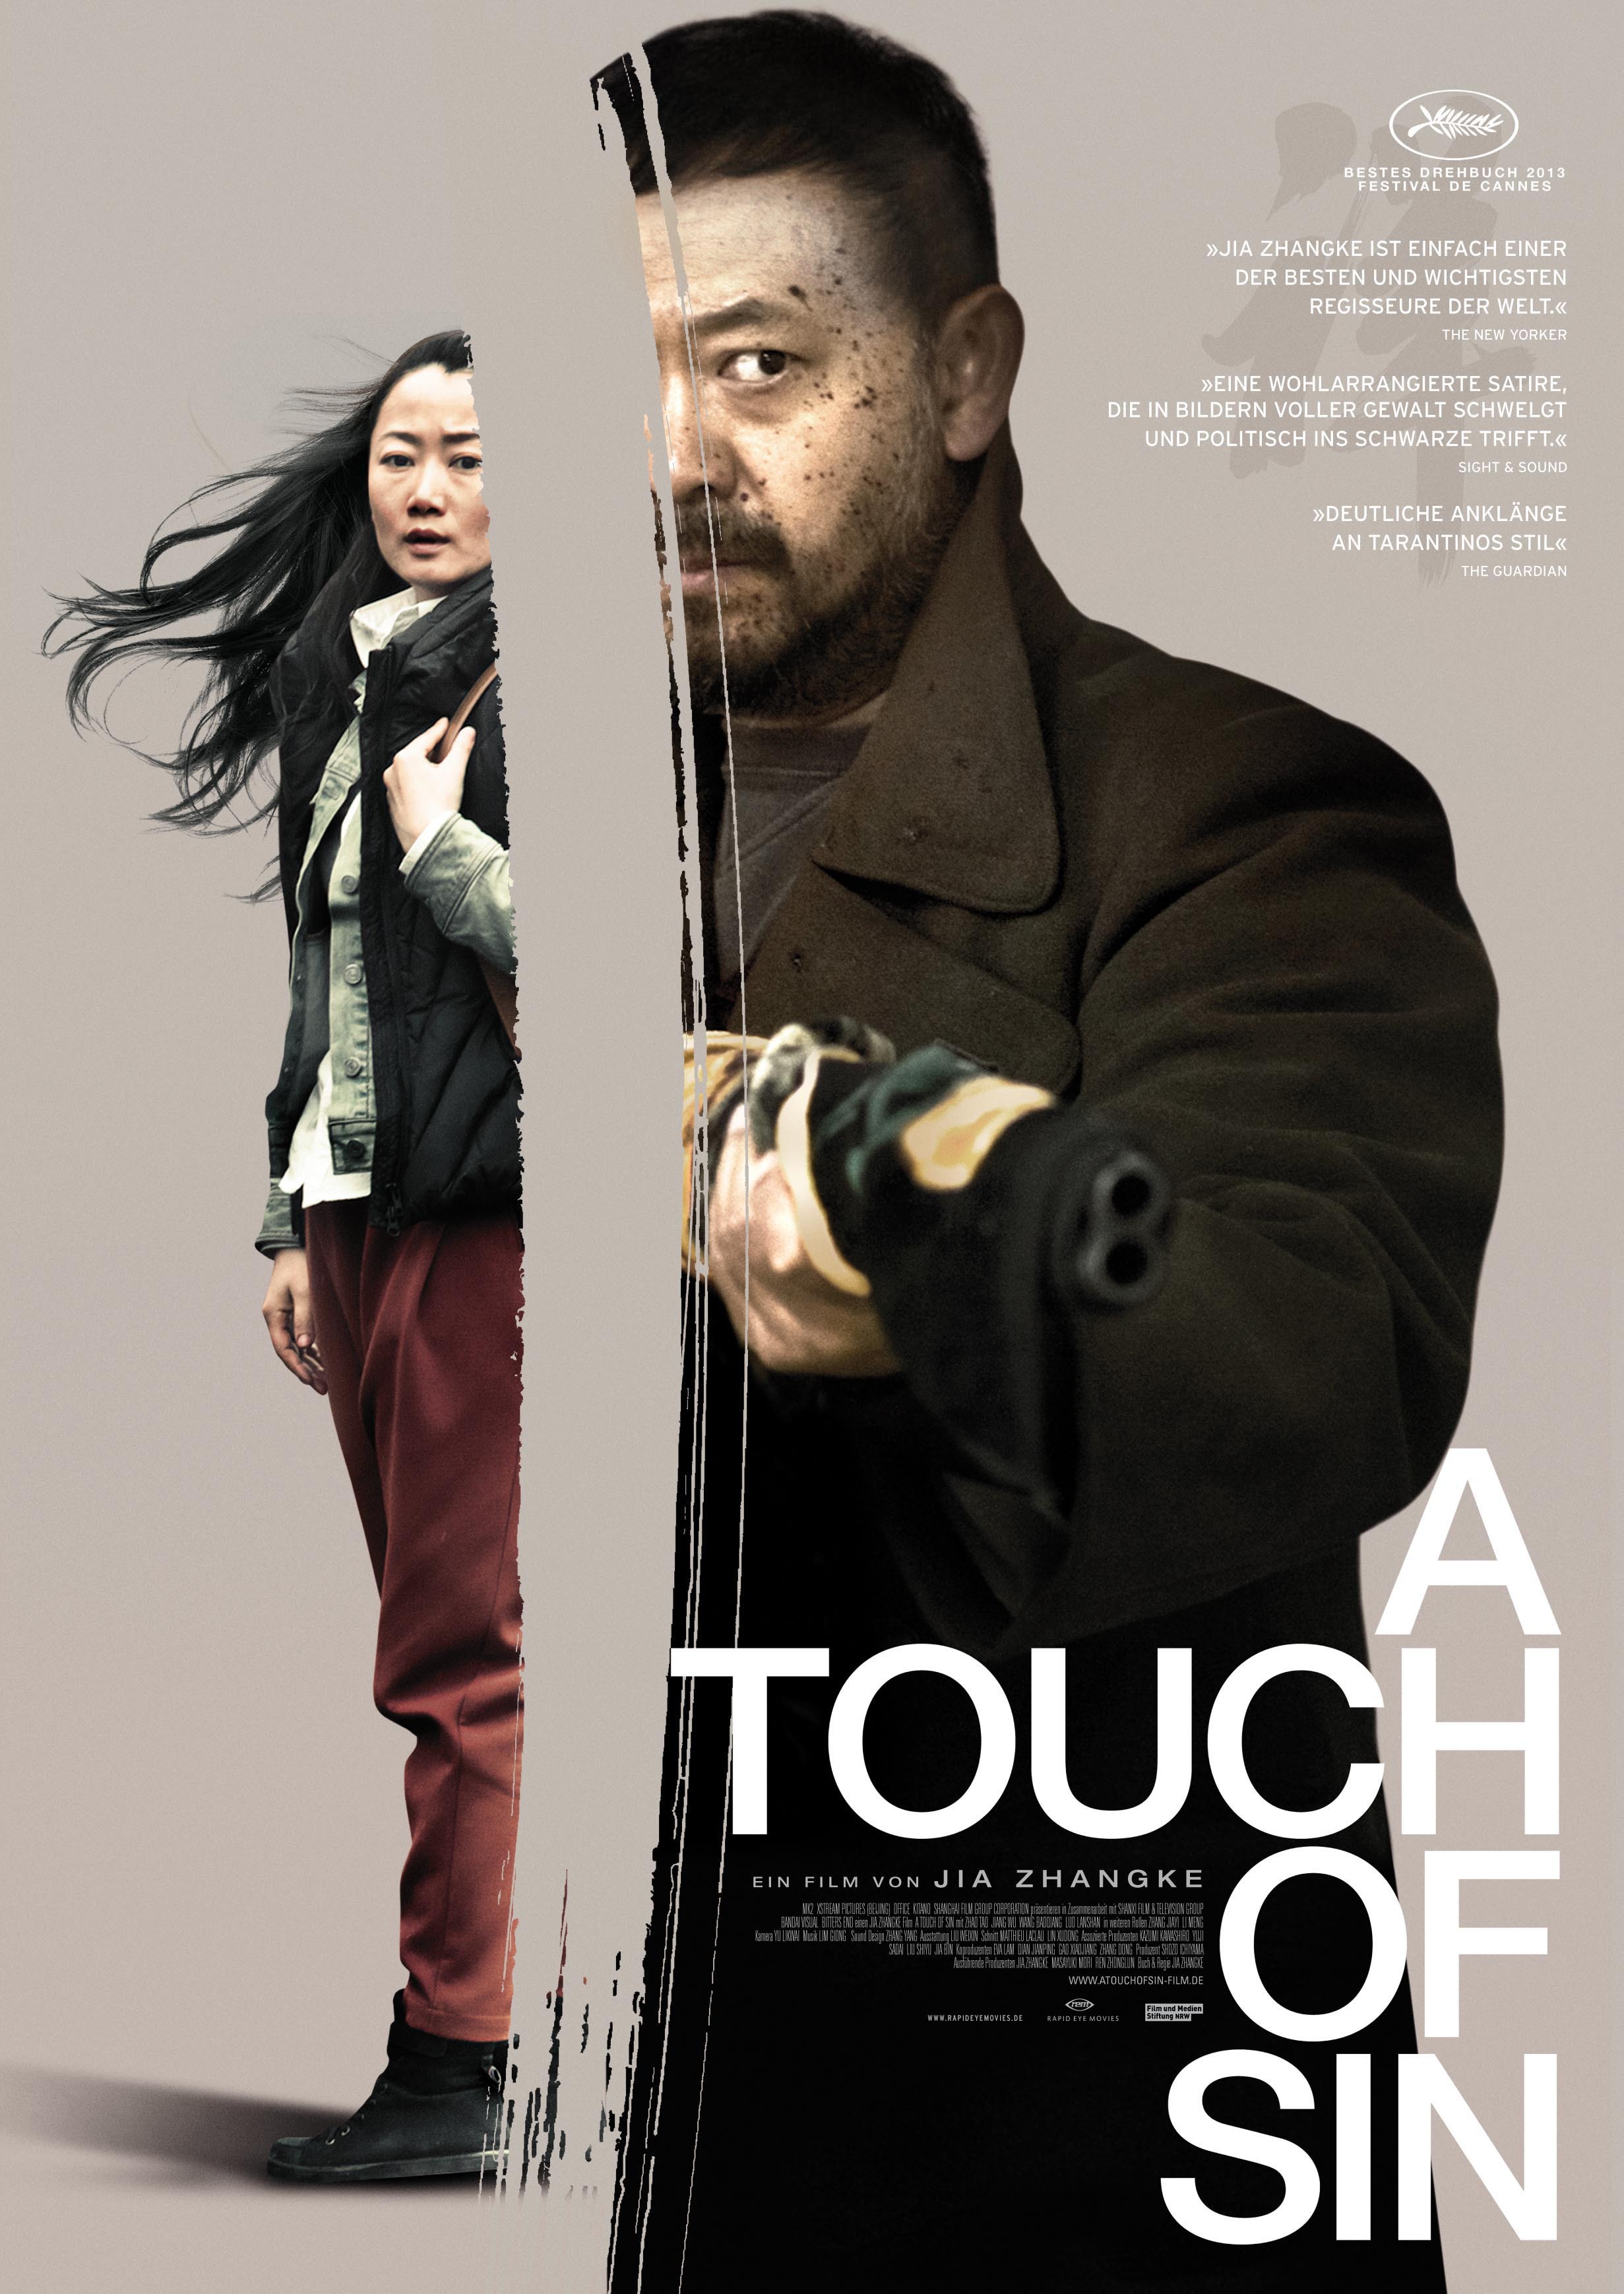 a-touch-of-sin-poster-1.jpg